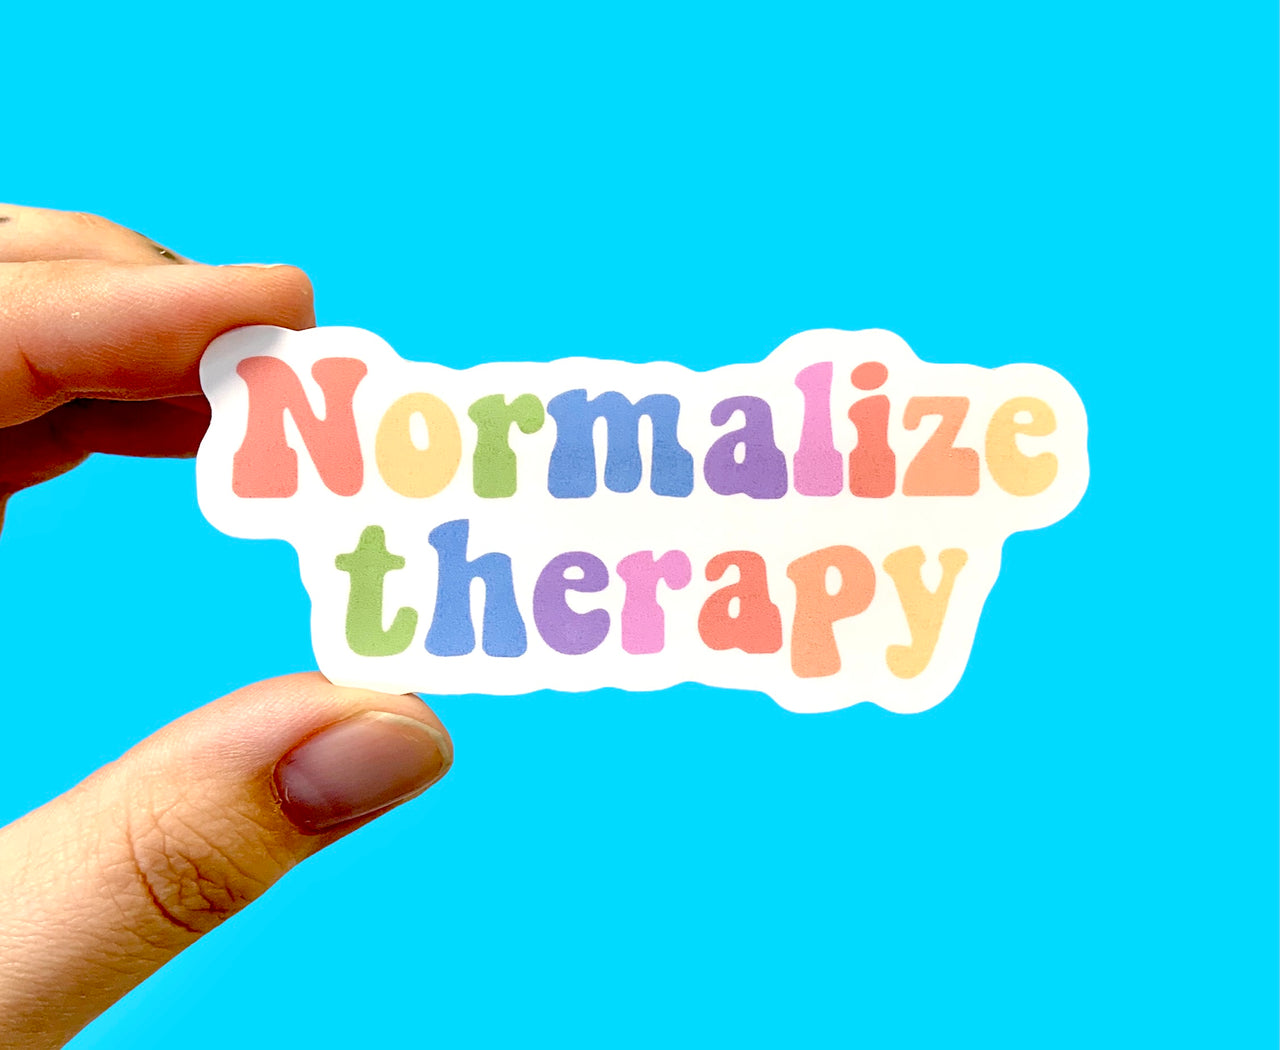 Normalize therapy (pack of 3 or 5 stickers)